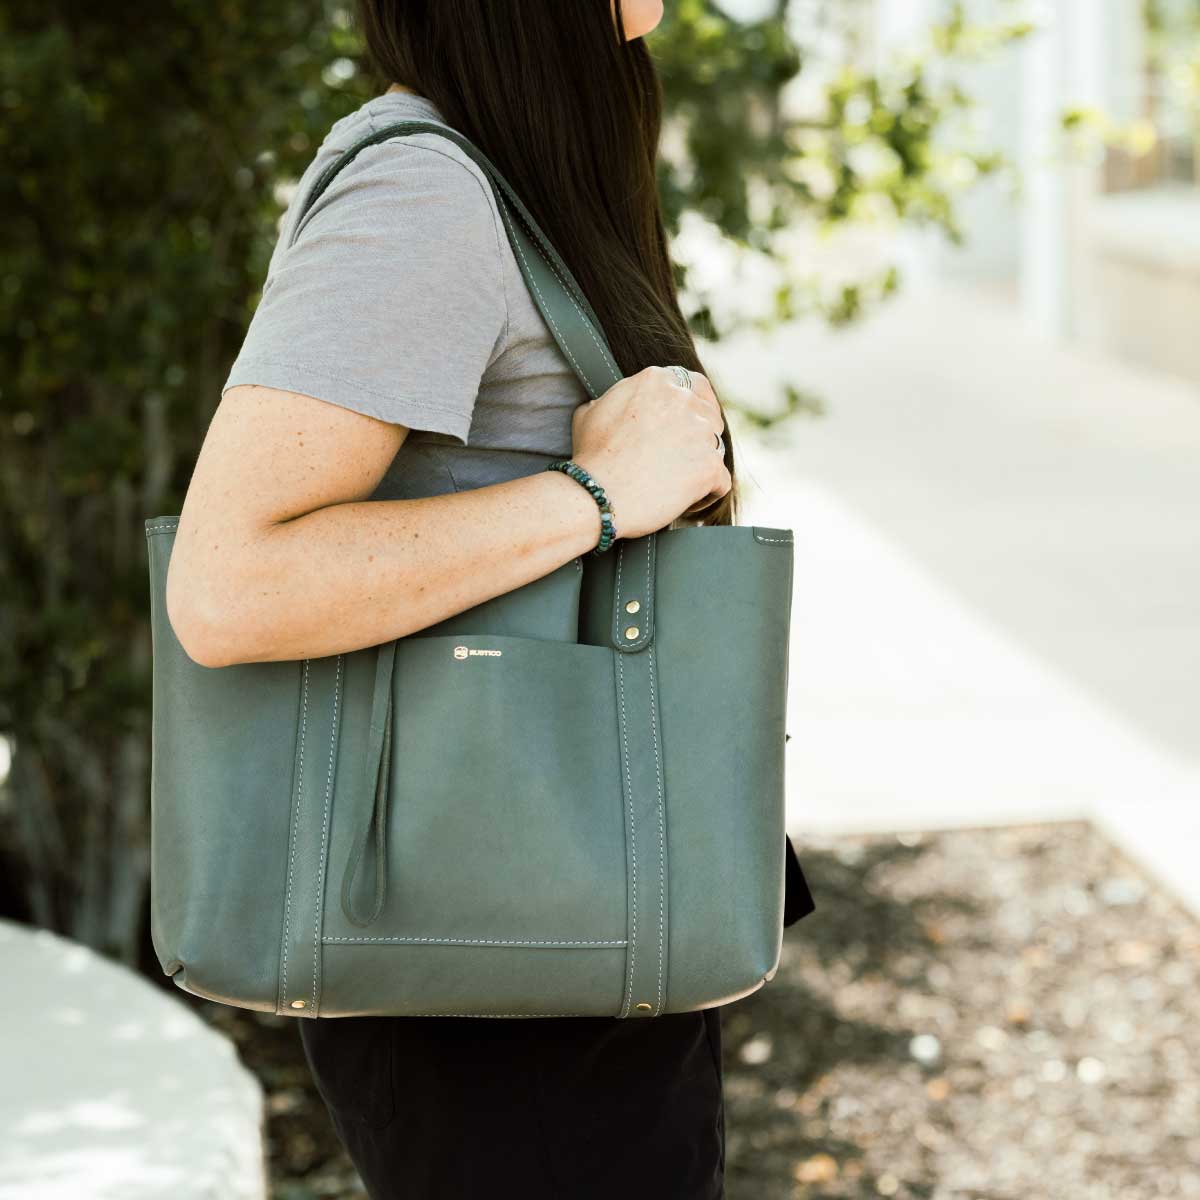 Women's Leather Tote Bags Handcrafted in the USA – Rustico